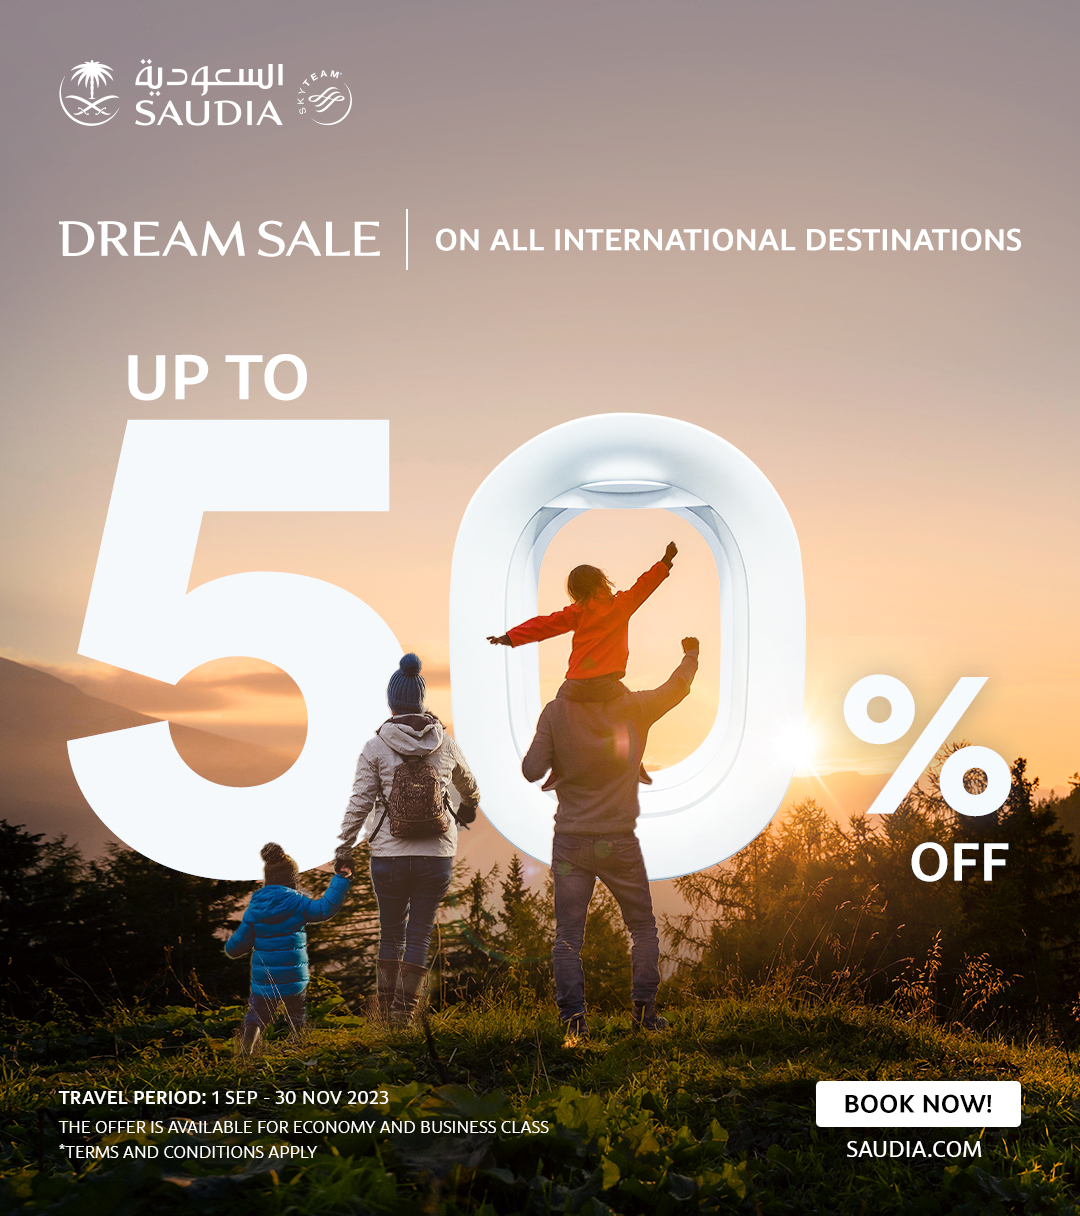 SAUDIA announces 50% discount on flights between the kingdom of